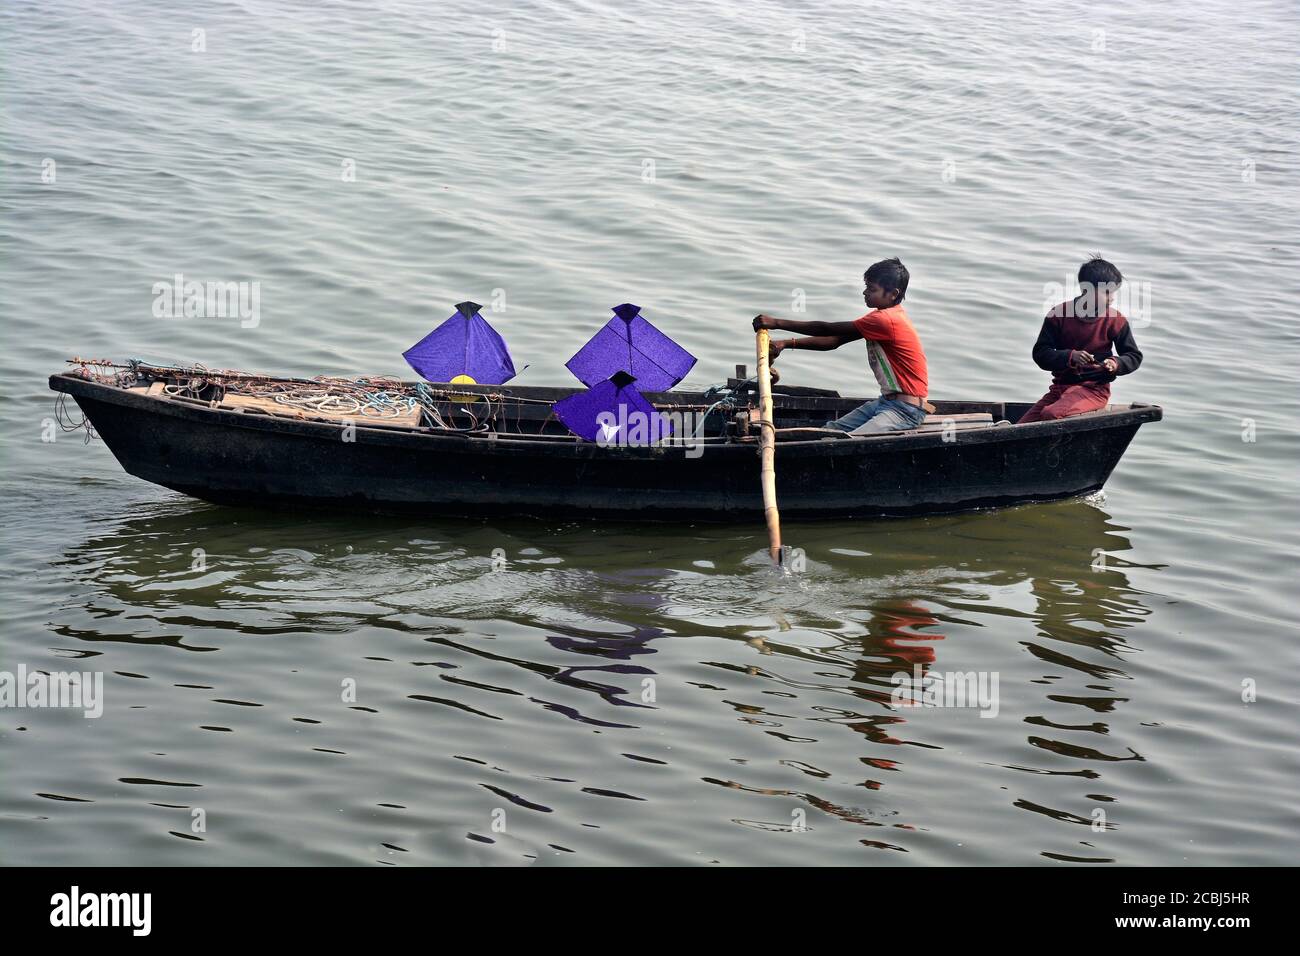 In Varanasi, two boys are collecting kites from the river Ganges and leaving it in a boat. Lots of kites are flown in Varanasi in winter. Stock Photo